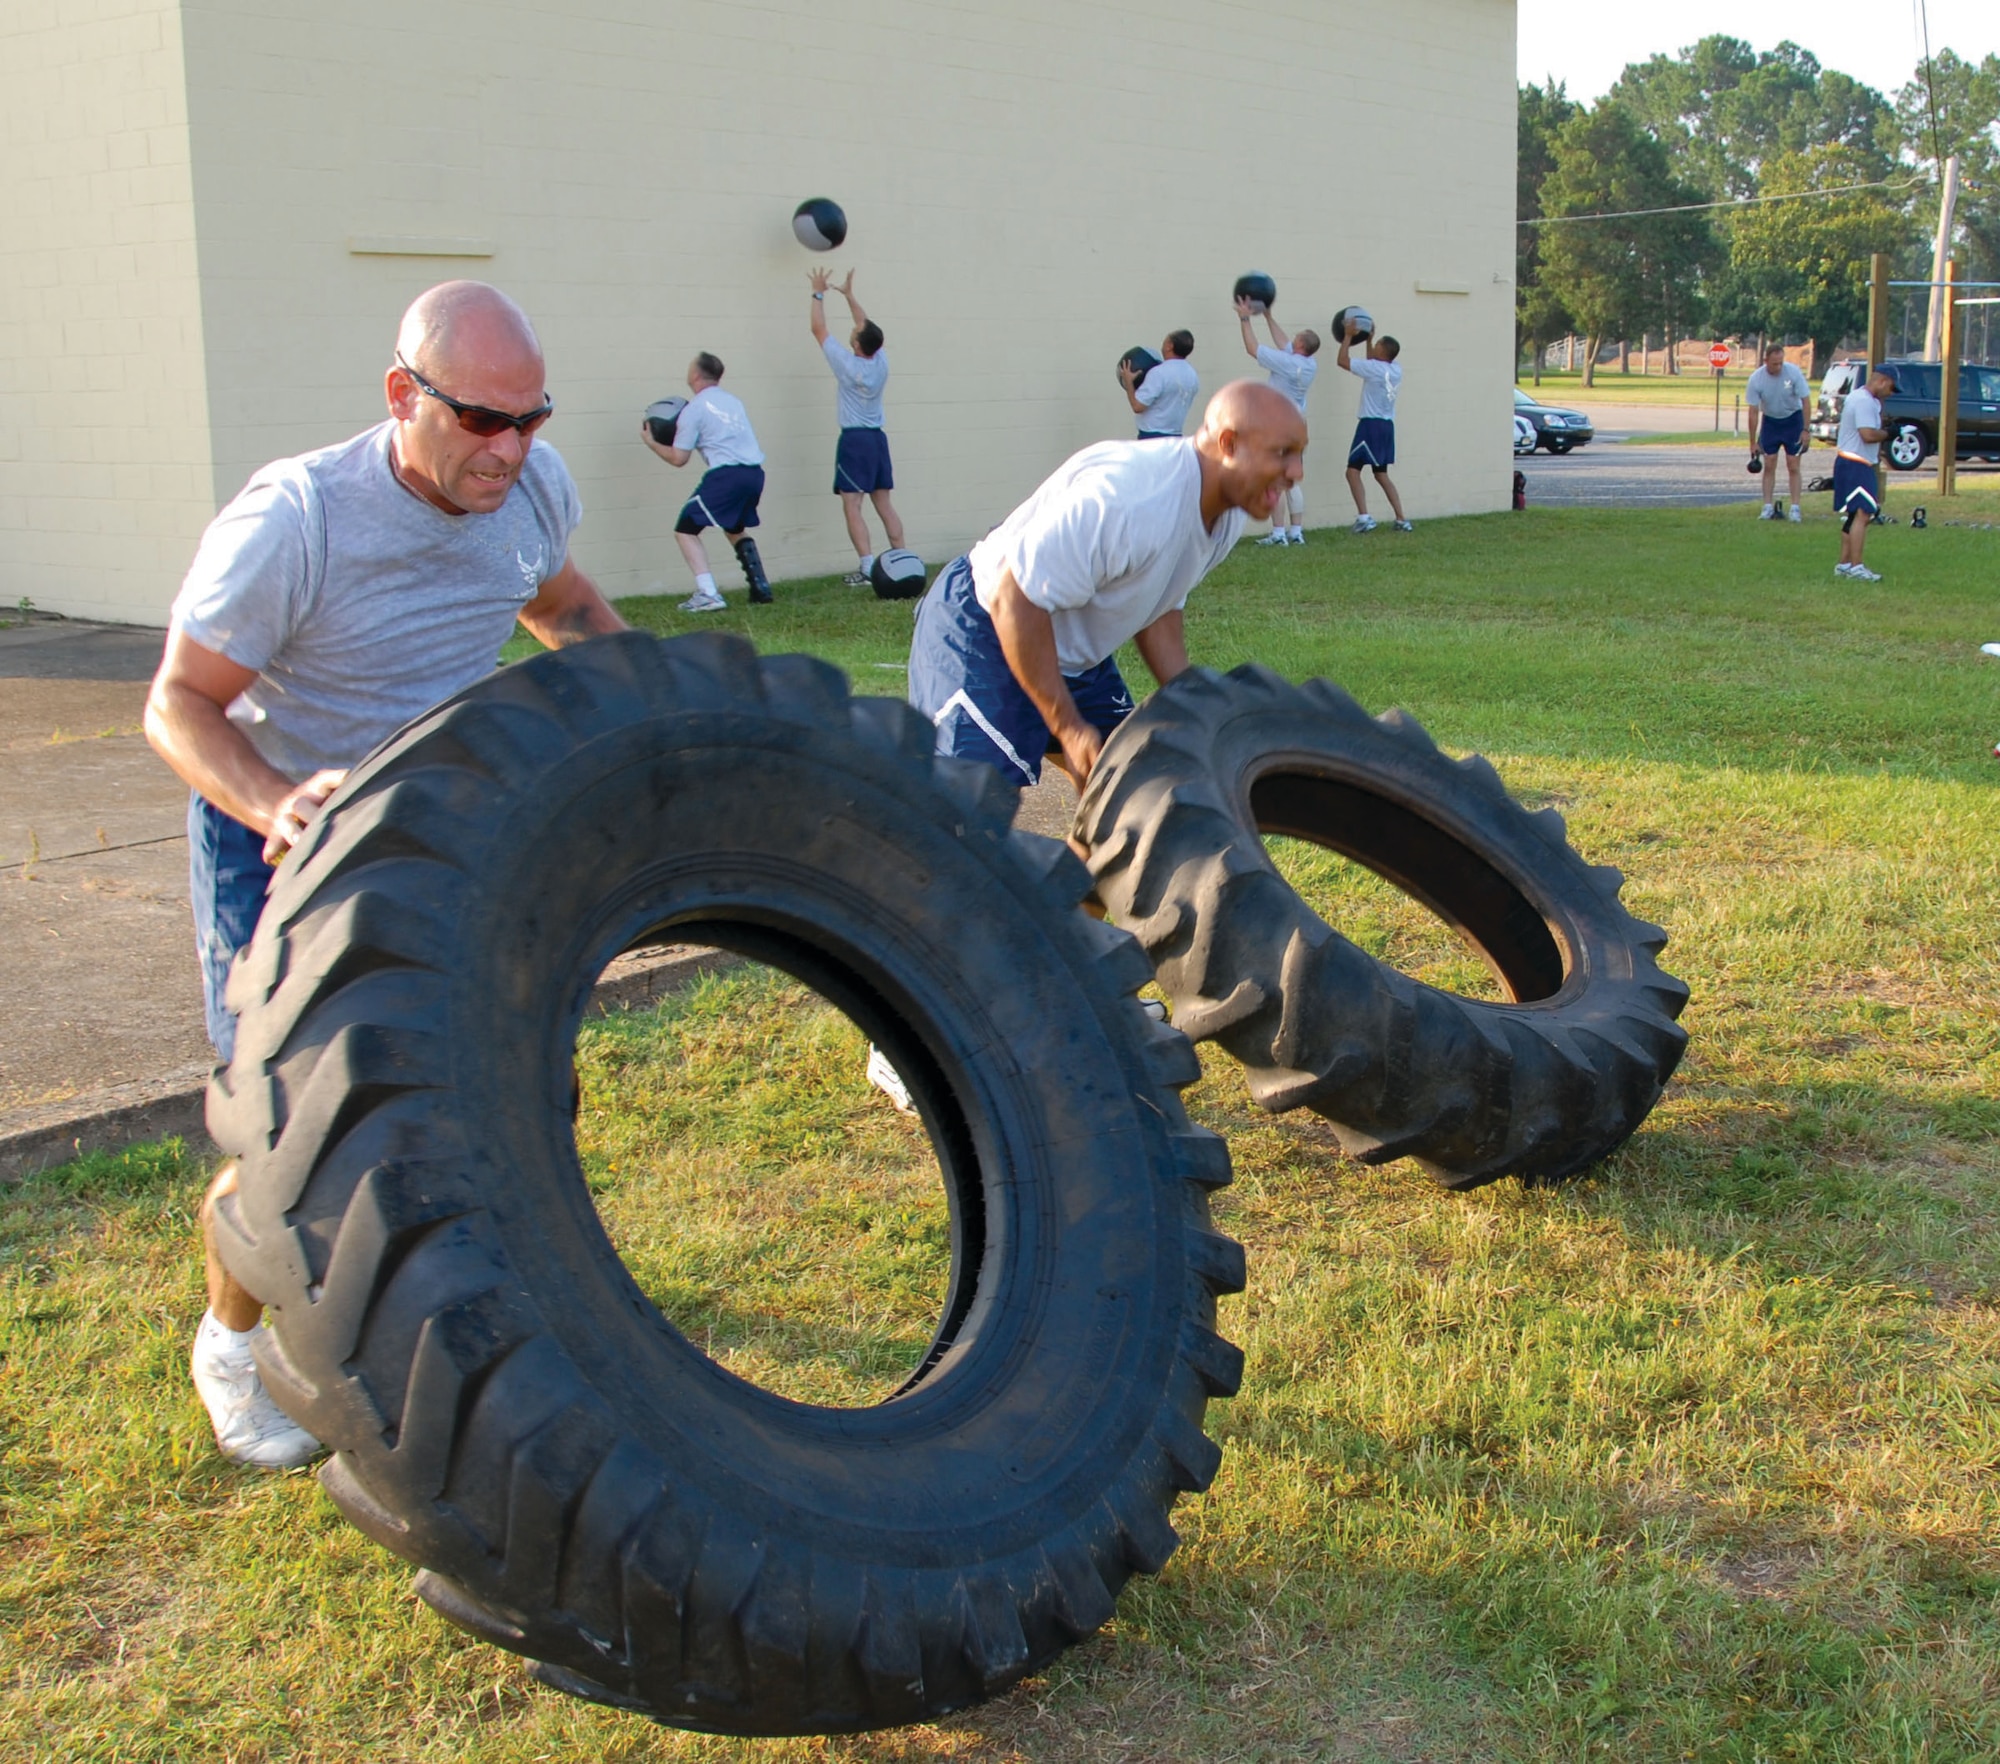 Senior Master Sgt. Robert Orsi, Air Force Senior Non-commissioned Officer Academy instructor, engages in "Conditions Limited" activities with Senior NCO Academy students at the satellite fitness center on Gunter Monday. Sergeant Orsi and fellow instructor Master Sgt. Christy Caskey established the program to, "give Airmen on profile the ability to exercise and stay healthy," Sergeant Caskey said. (U.S. Air Force photo/Jamie Pitcher)